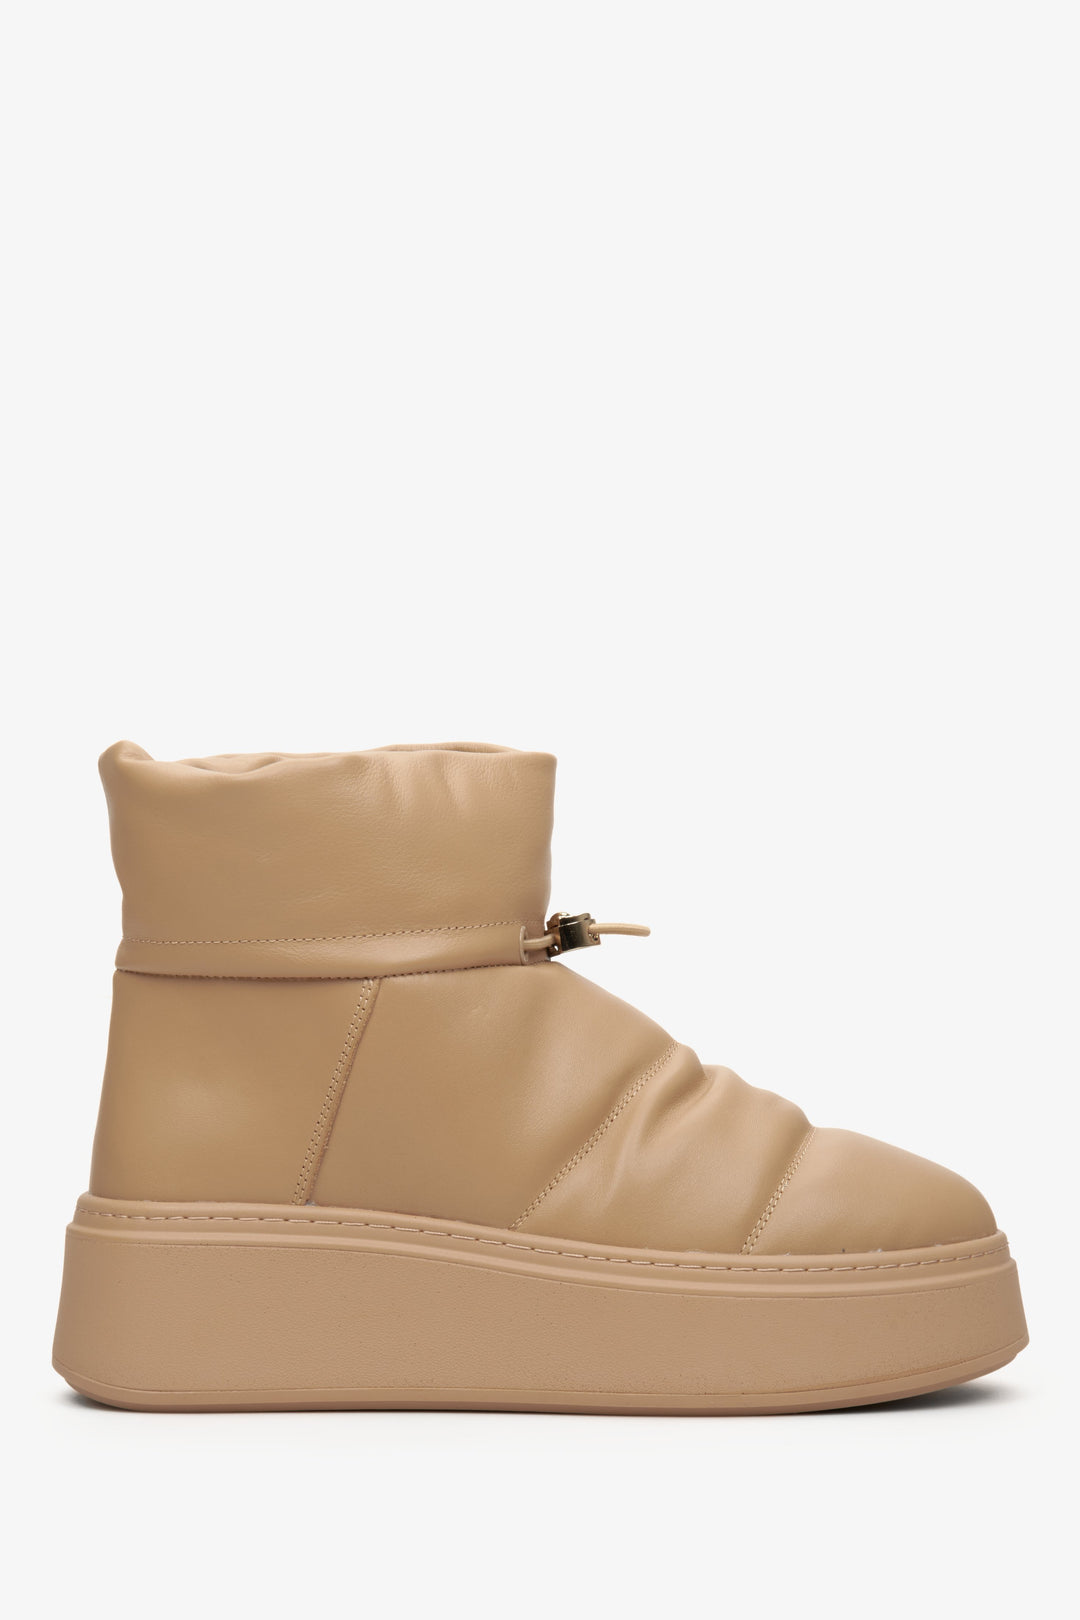 Women's Brown Snow Boots with a Turnbuckle Estro ER00112431.